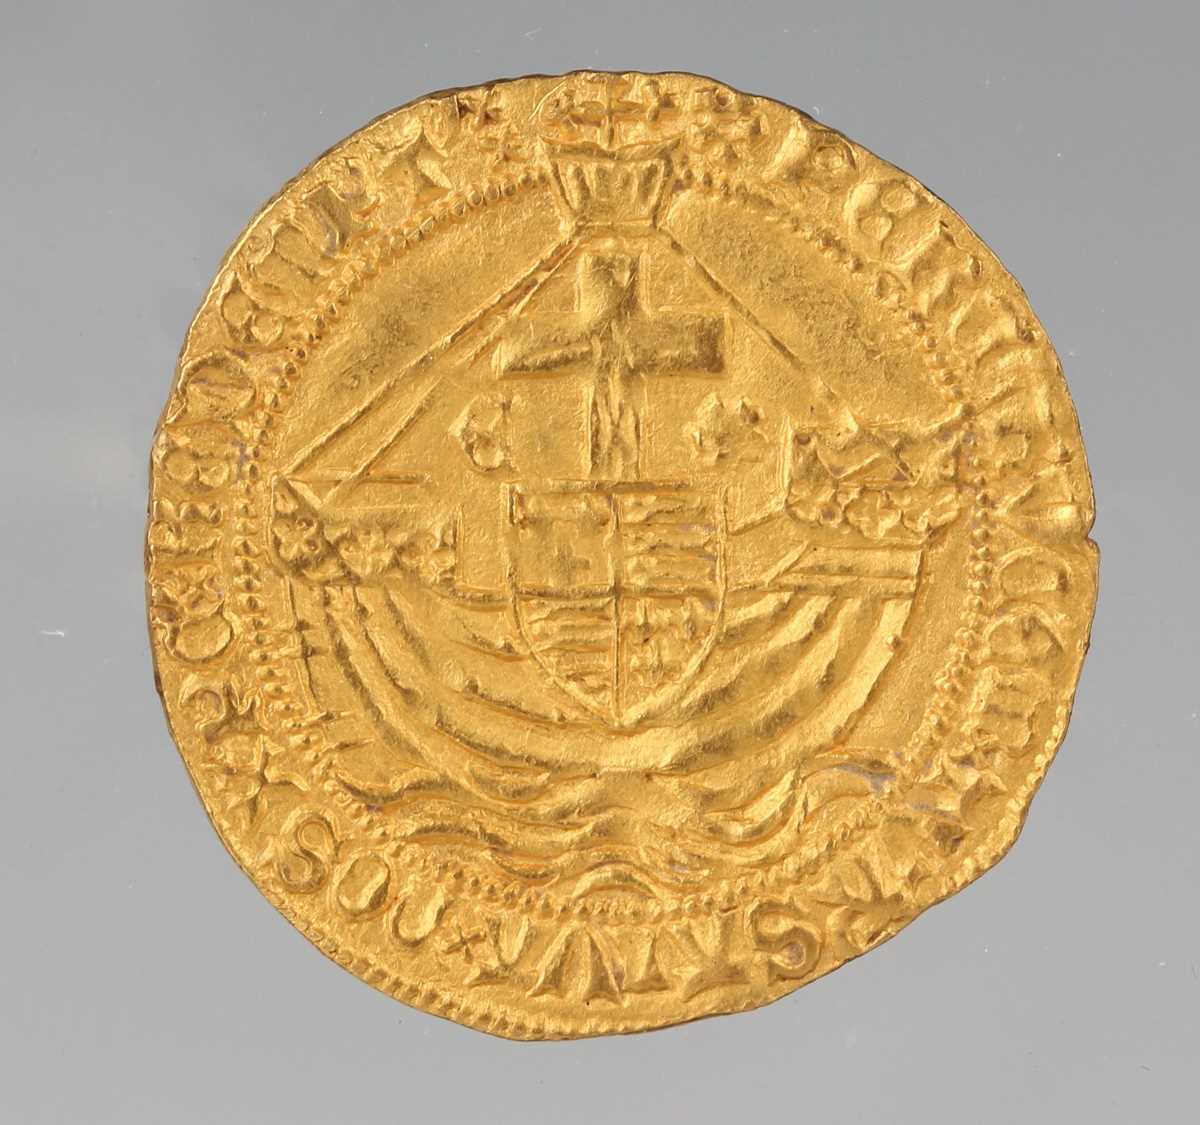 An Edward IV second reign gold angel 1471-1483, mintmark heraldic cinquefoil, S2091, weight 5.1g. - Image 2 of 2